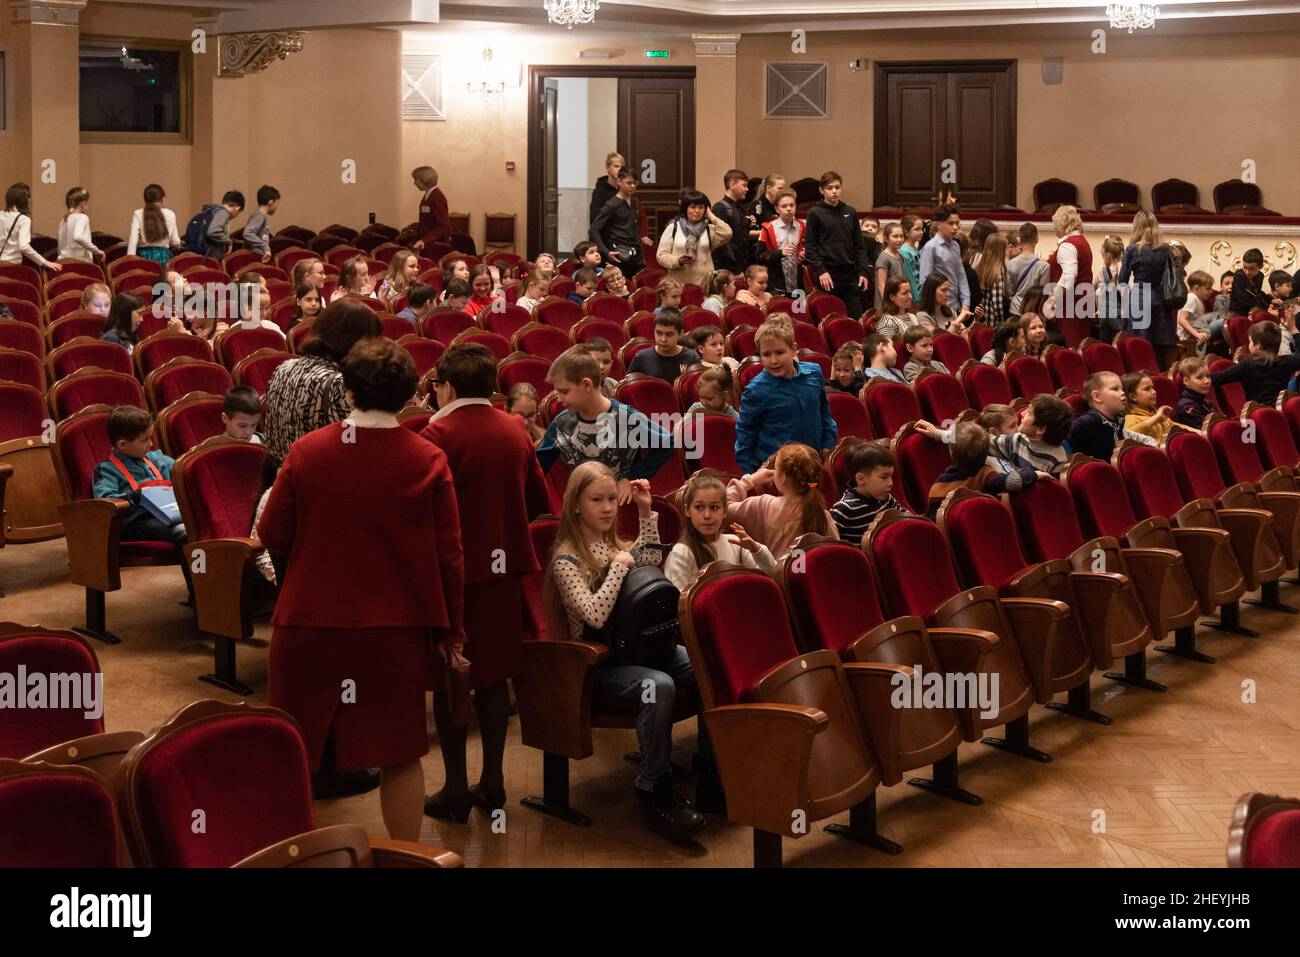 At the Bashkir State Opera and Ballet Theater in Ufa, Russia, the audience takes their places in the pre-show hall. Stock Photo